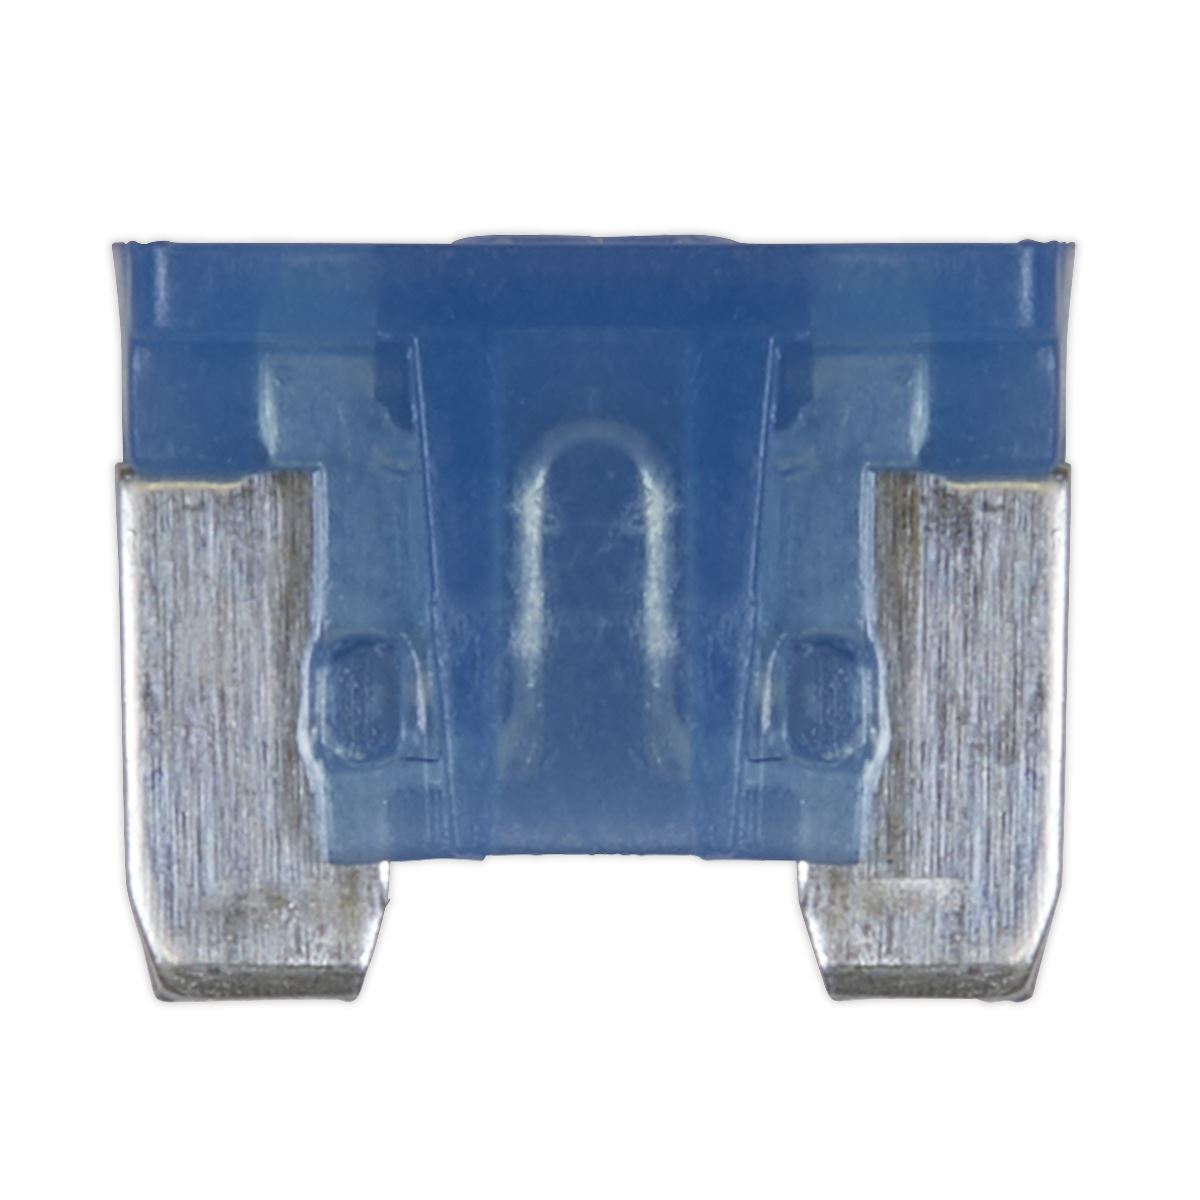 Sealey Automotive MICRO Blade Fuse 15A - Pack of 50